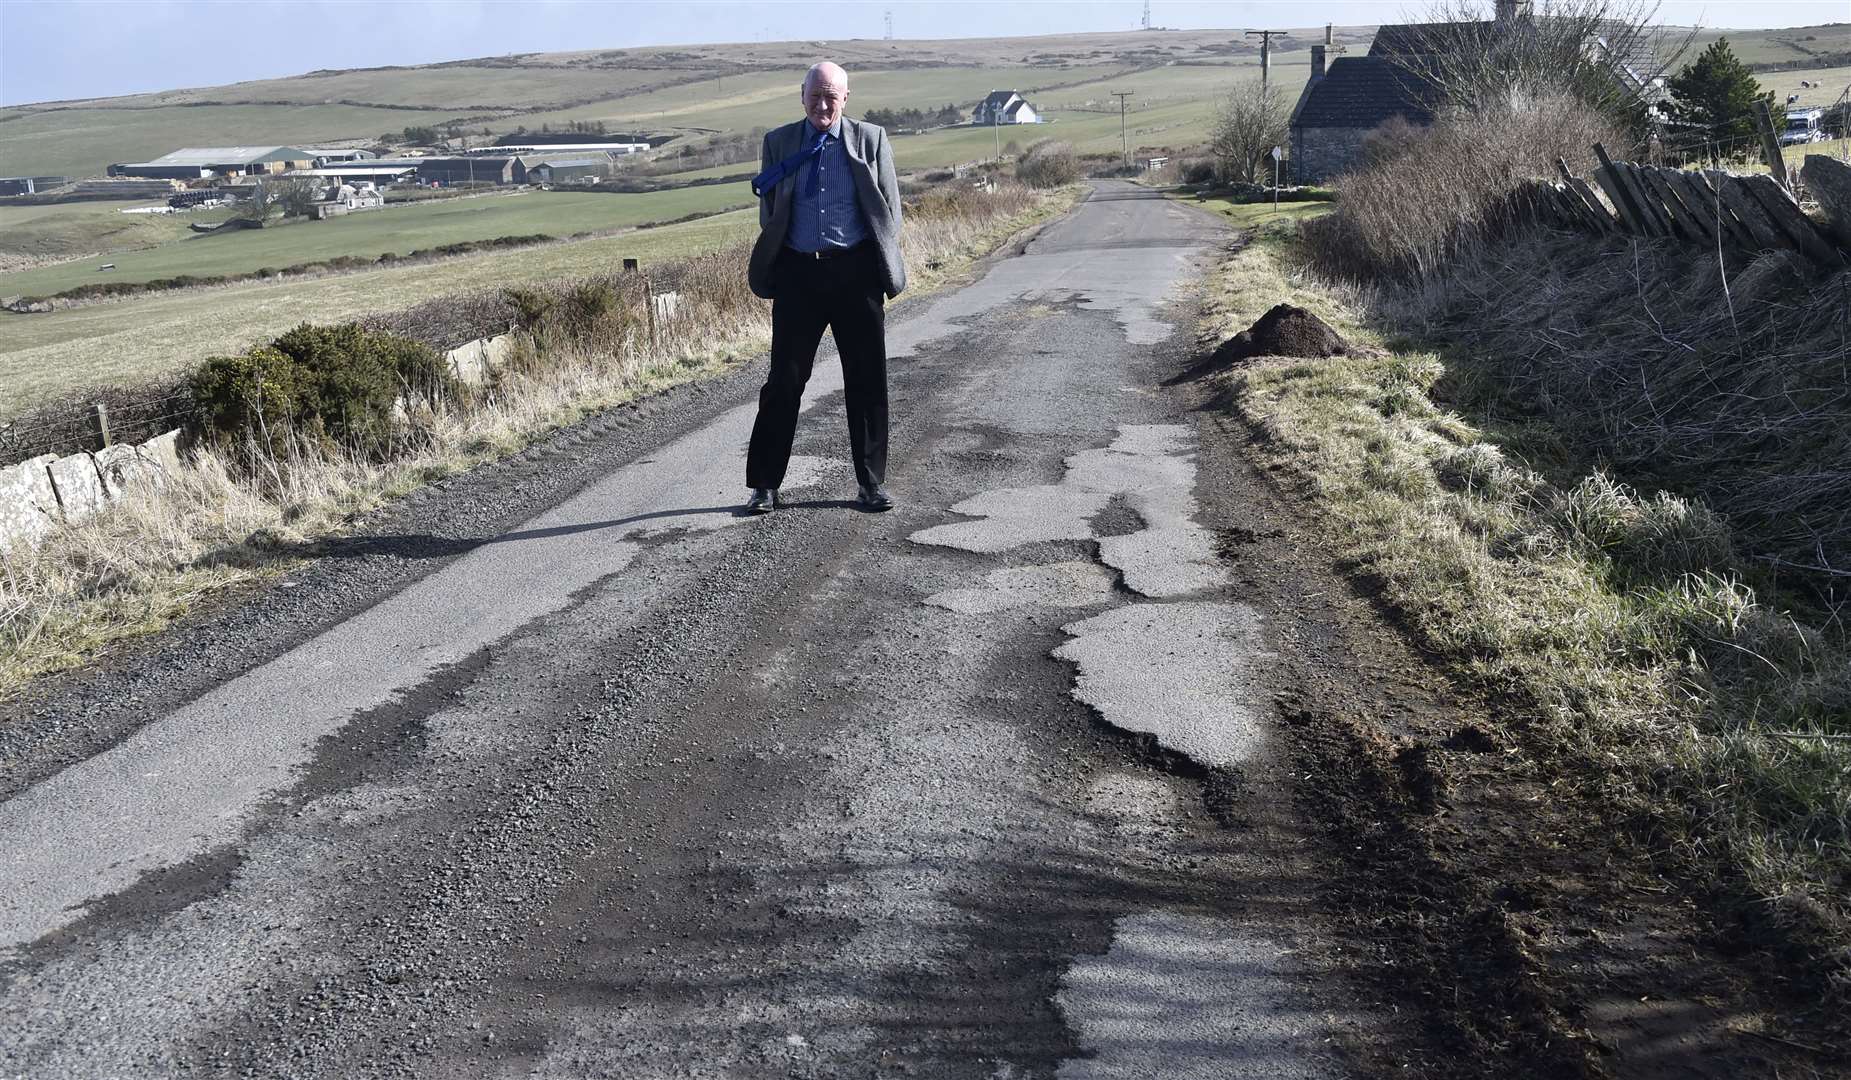 Iain Gregory of Caithness Roads Recovery pointing out the potholes at Braeside Retreats, Sibmister, earlier this year.